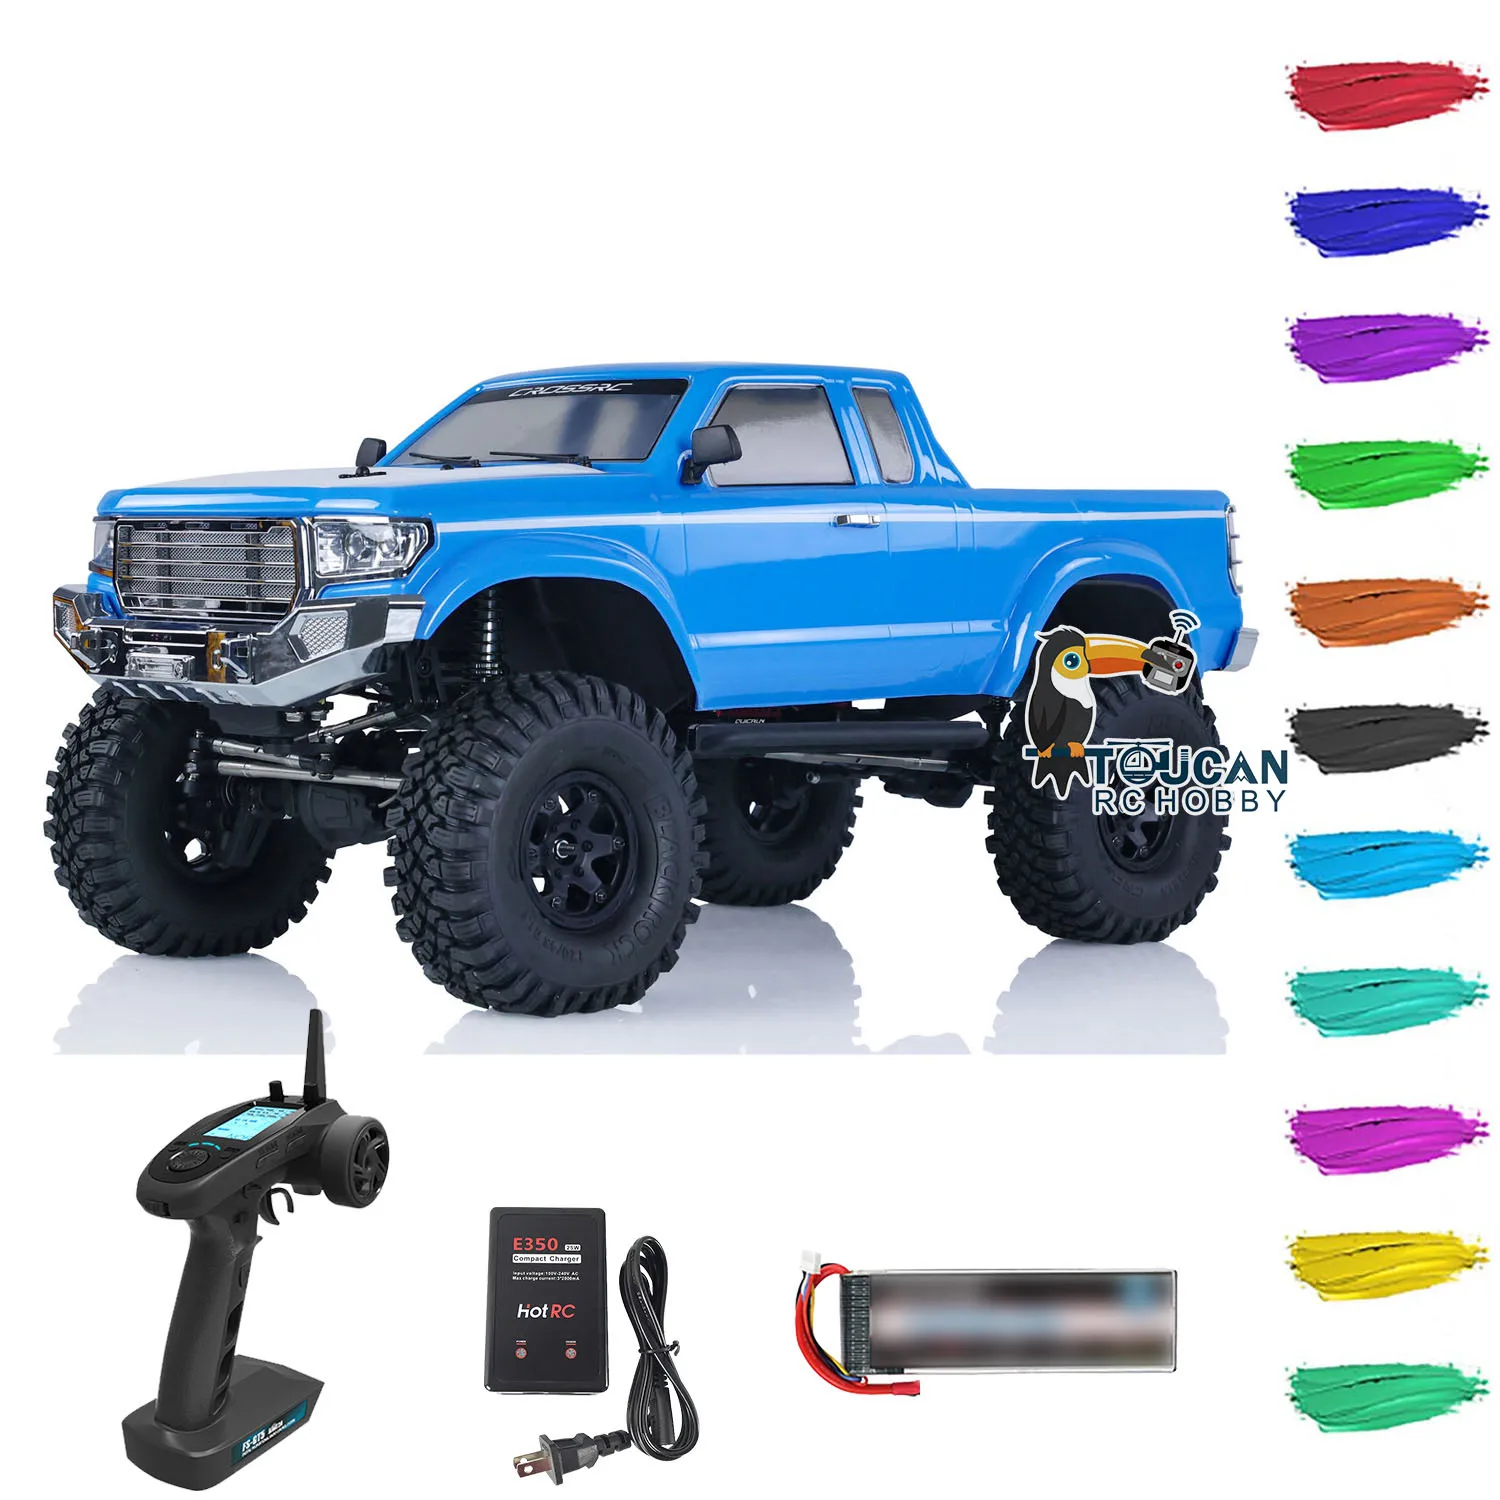 

Gifts CROSSRC 4x4 RC Crawler Car 1/10 AT4V RTR Remote Control Off-road Vehicles Ready to Run Model for Boys Toys THZH1652